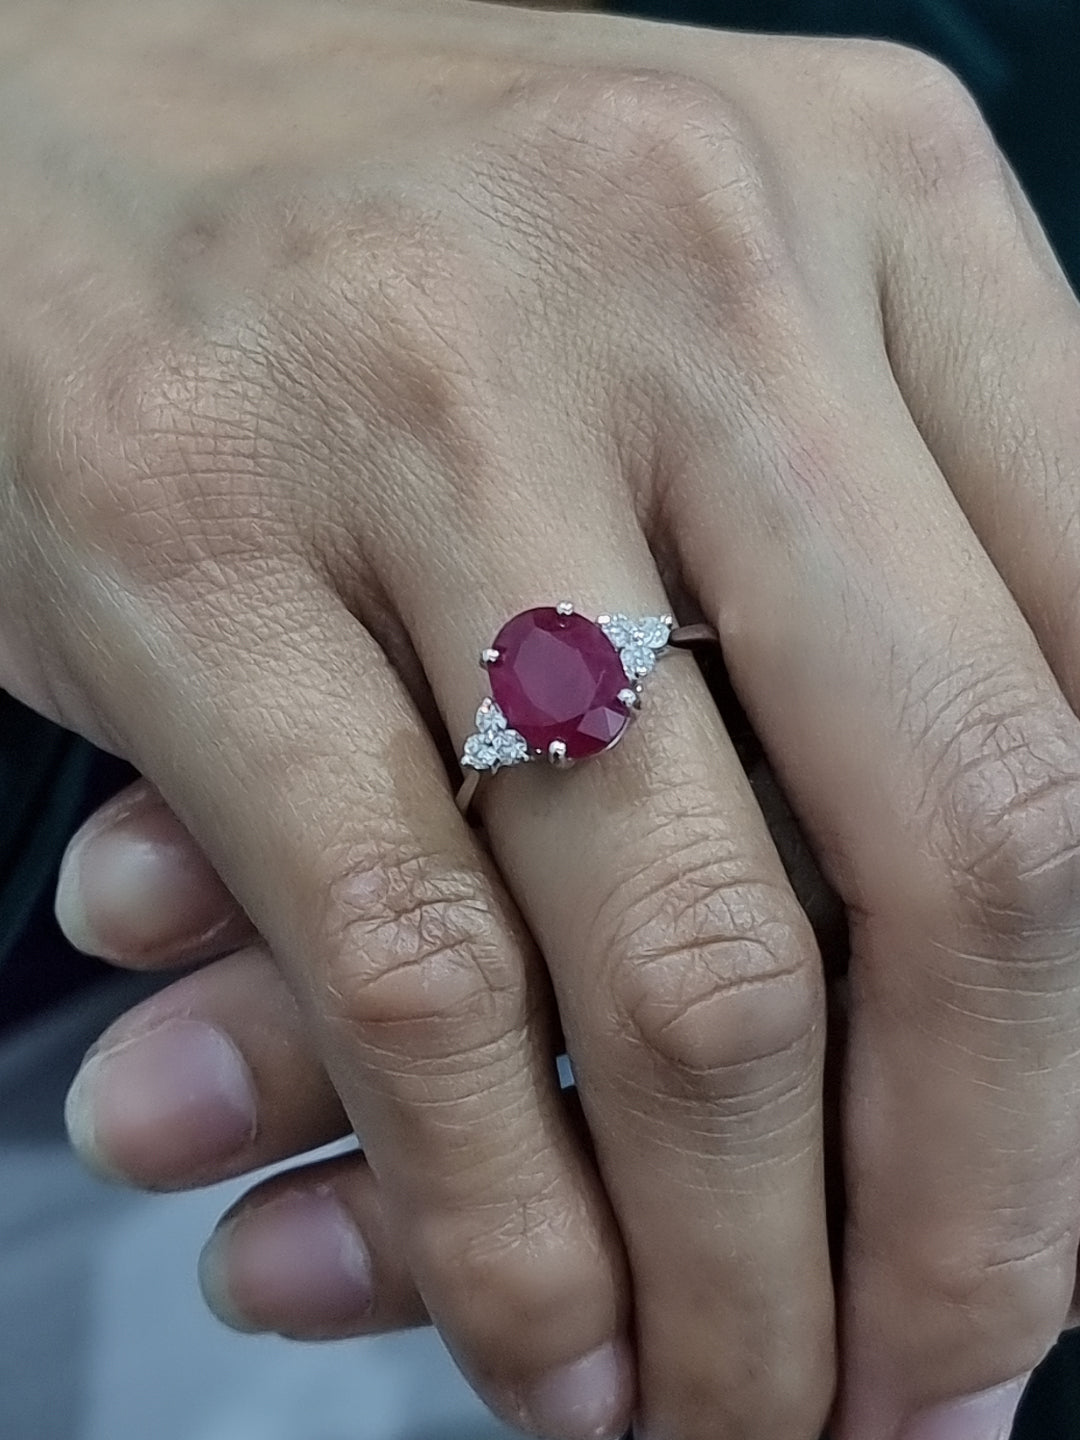 Ruby And Diamond Ring In 18k White Gold.